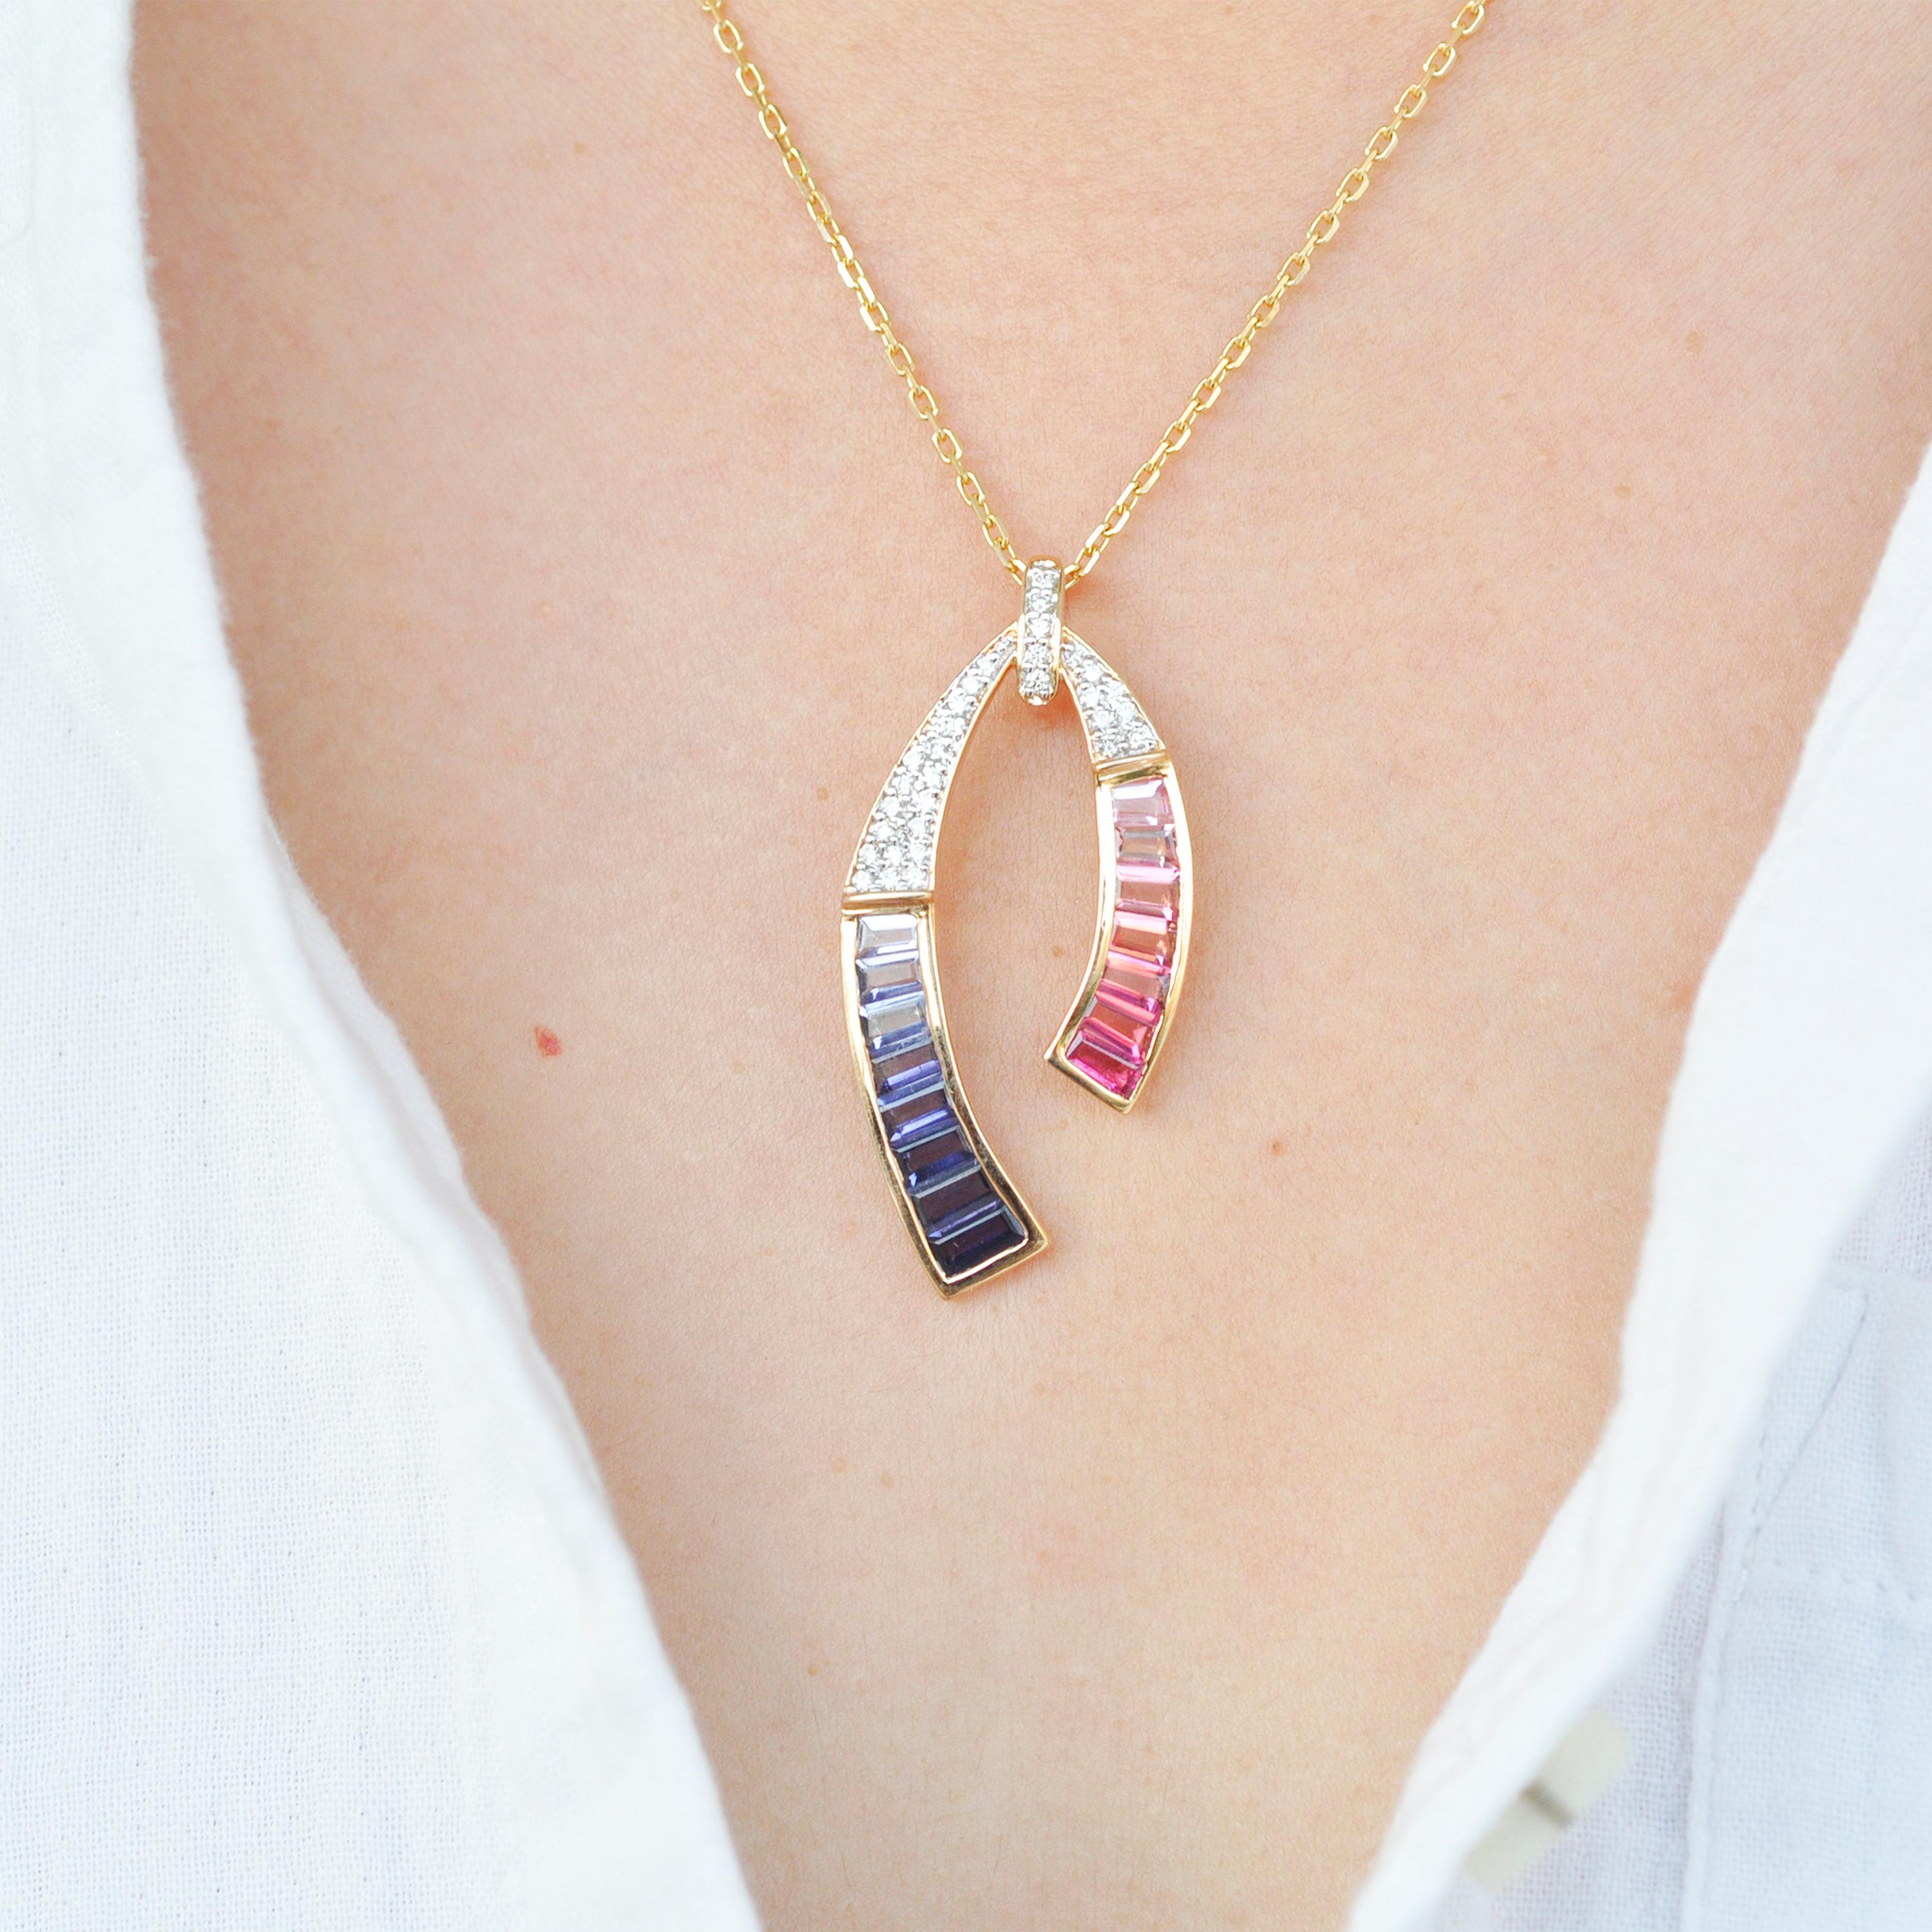 18 karat yellow gold pink tourmaline iolite baguette diamond pendant necklace

Inspired by the horse-shoe design, this pendant made in 18k yellow gold gives it a contemporary make-over. Line art clubbed with pave studded diamonds and vibrant